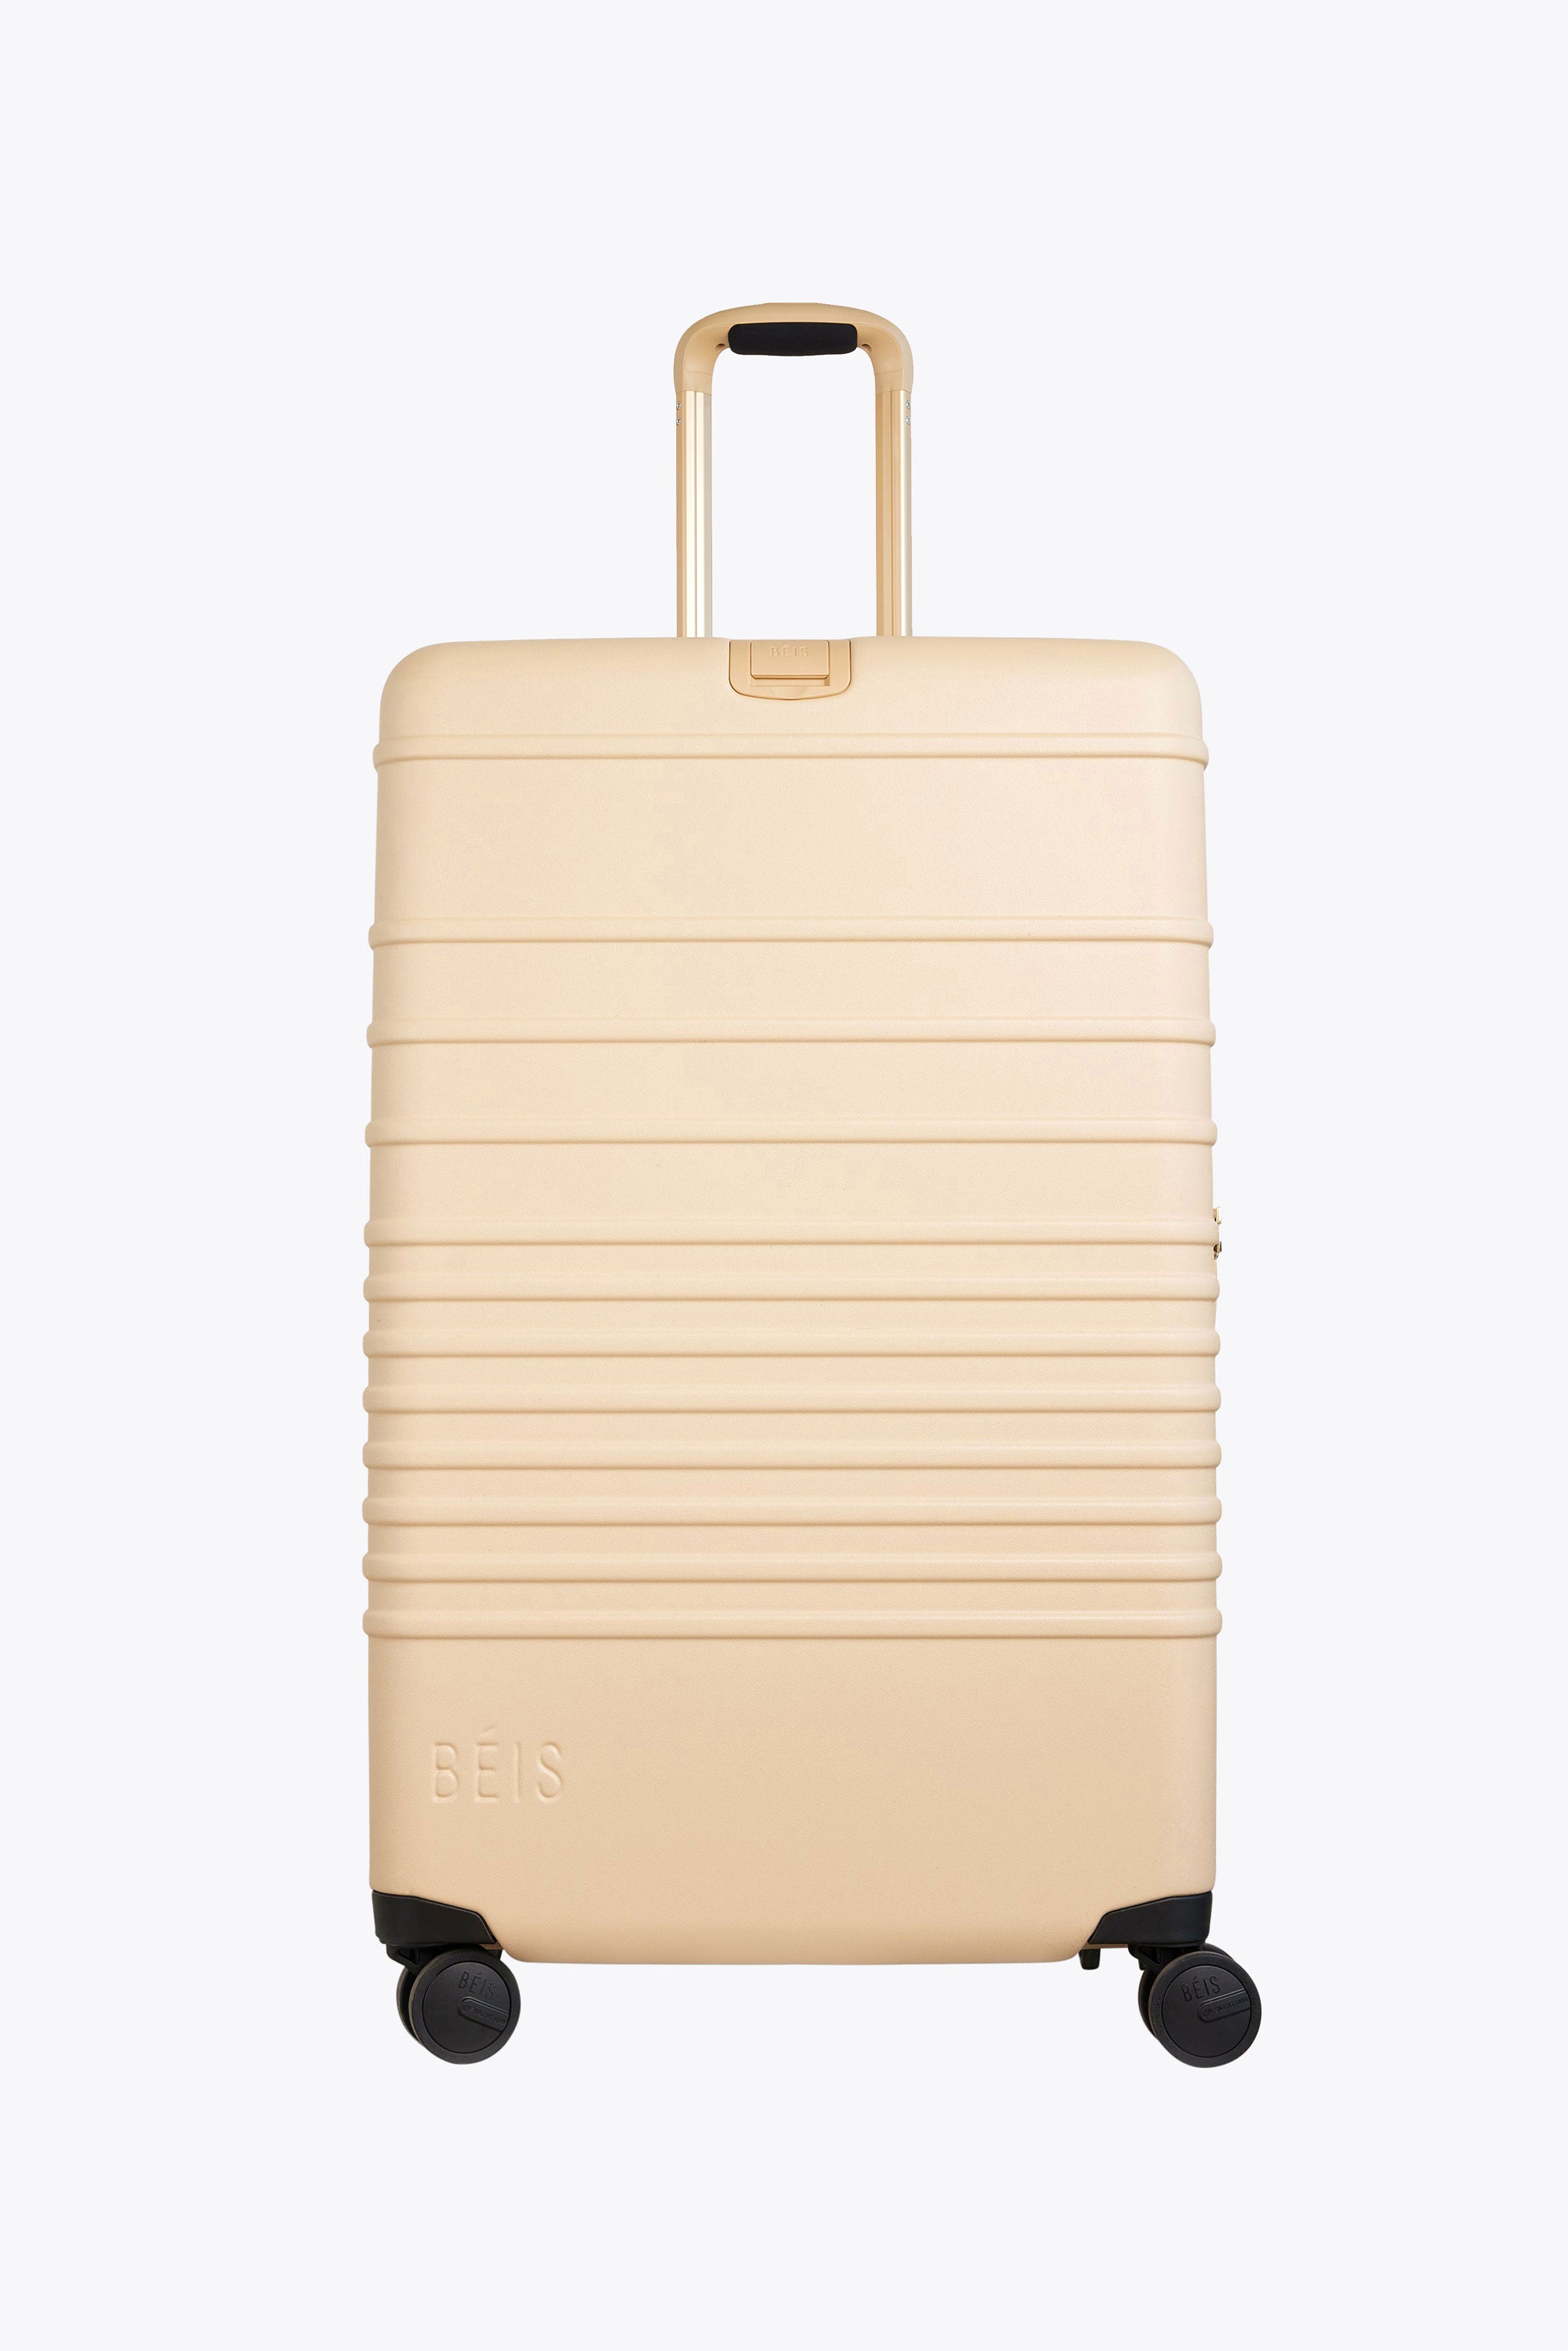 Beis The 29-inch Rolling Spinner Suitcase in Beige